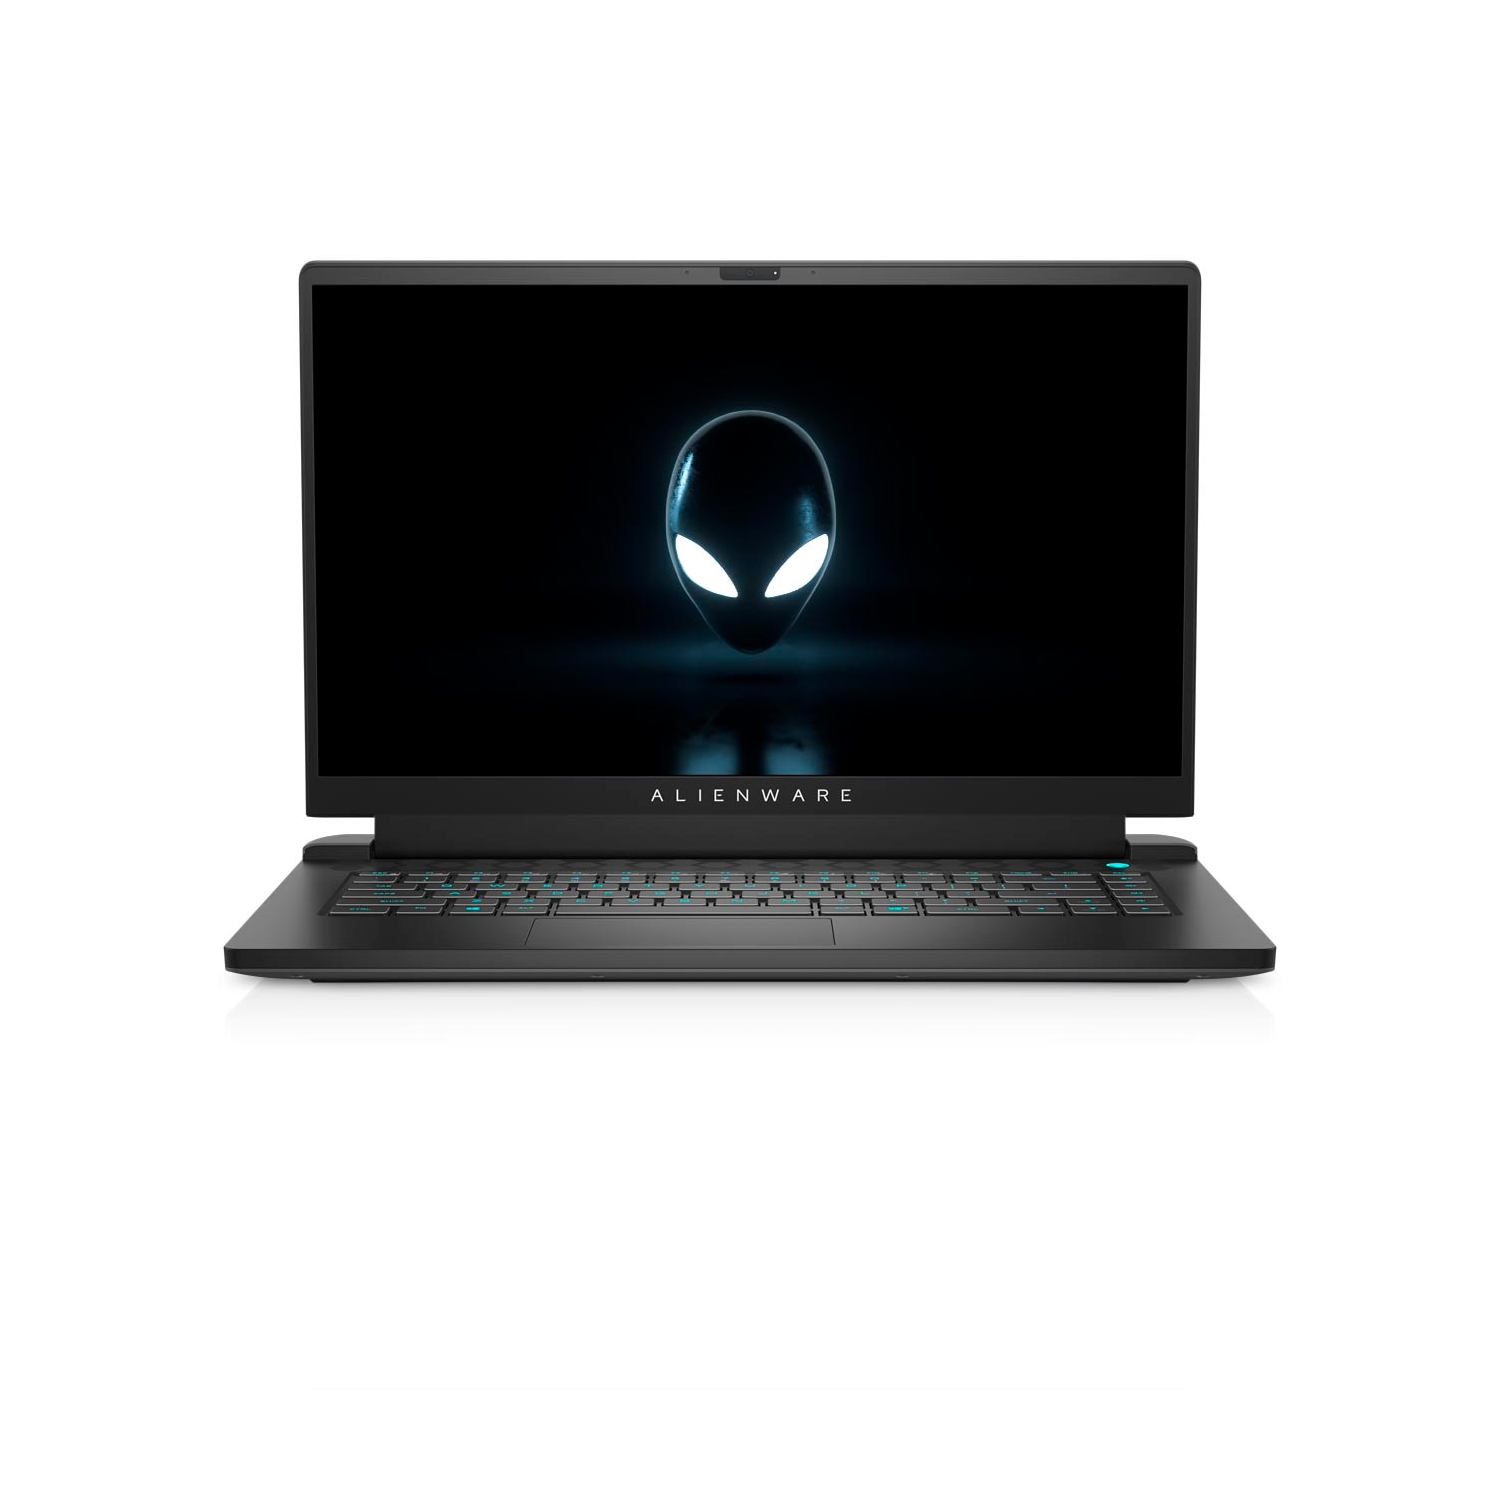 Refurbished (Excellent) - Dell Alienware m15 R5 Ryzen Edition Gaming Laptop (2021), 15.6" QHD, Core Ryzen 9, 1TB SSD, 16GB RAM, RTX 3070, 8 Cores @ 4.6 GHz Certified